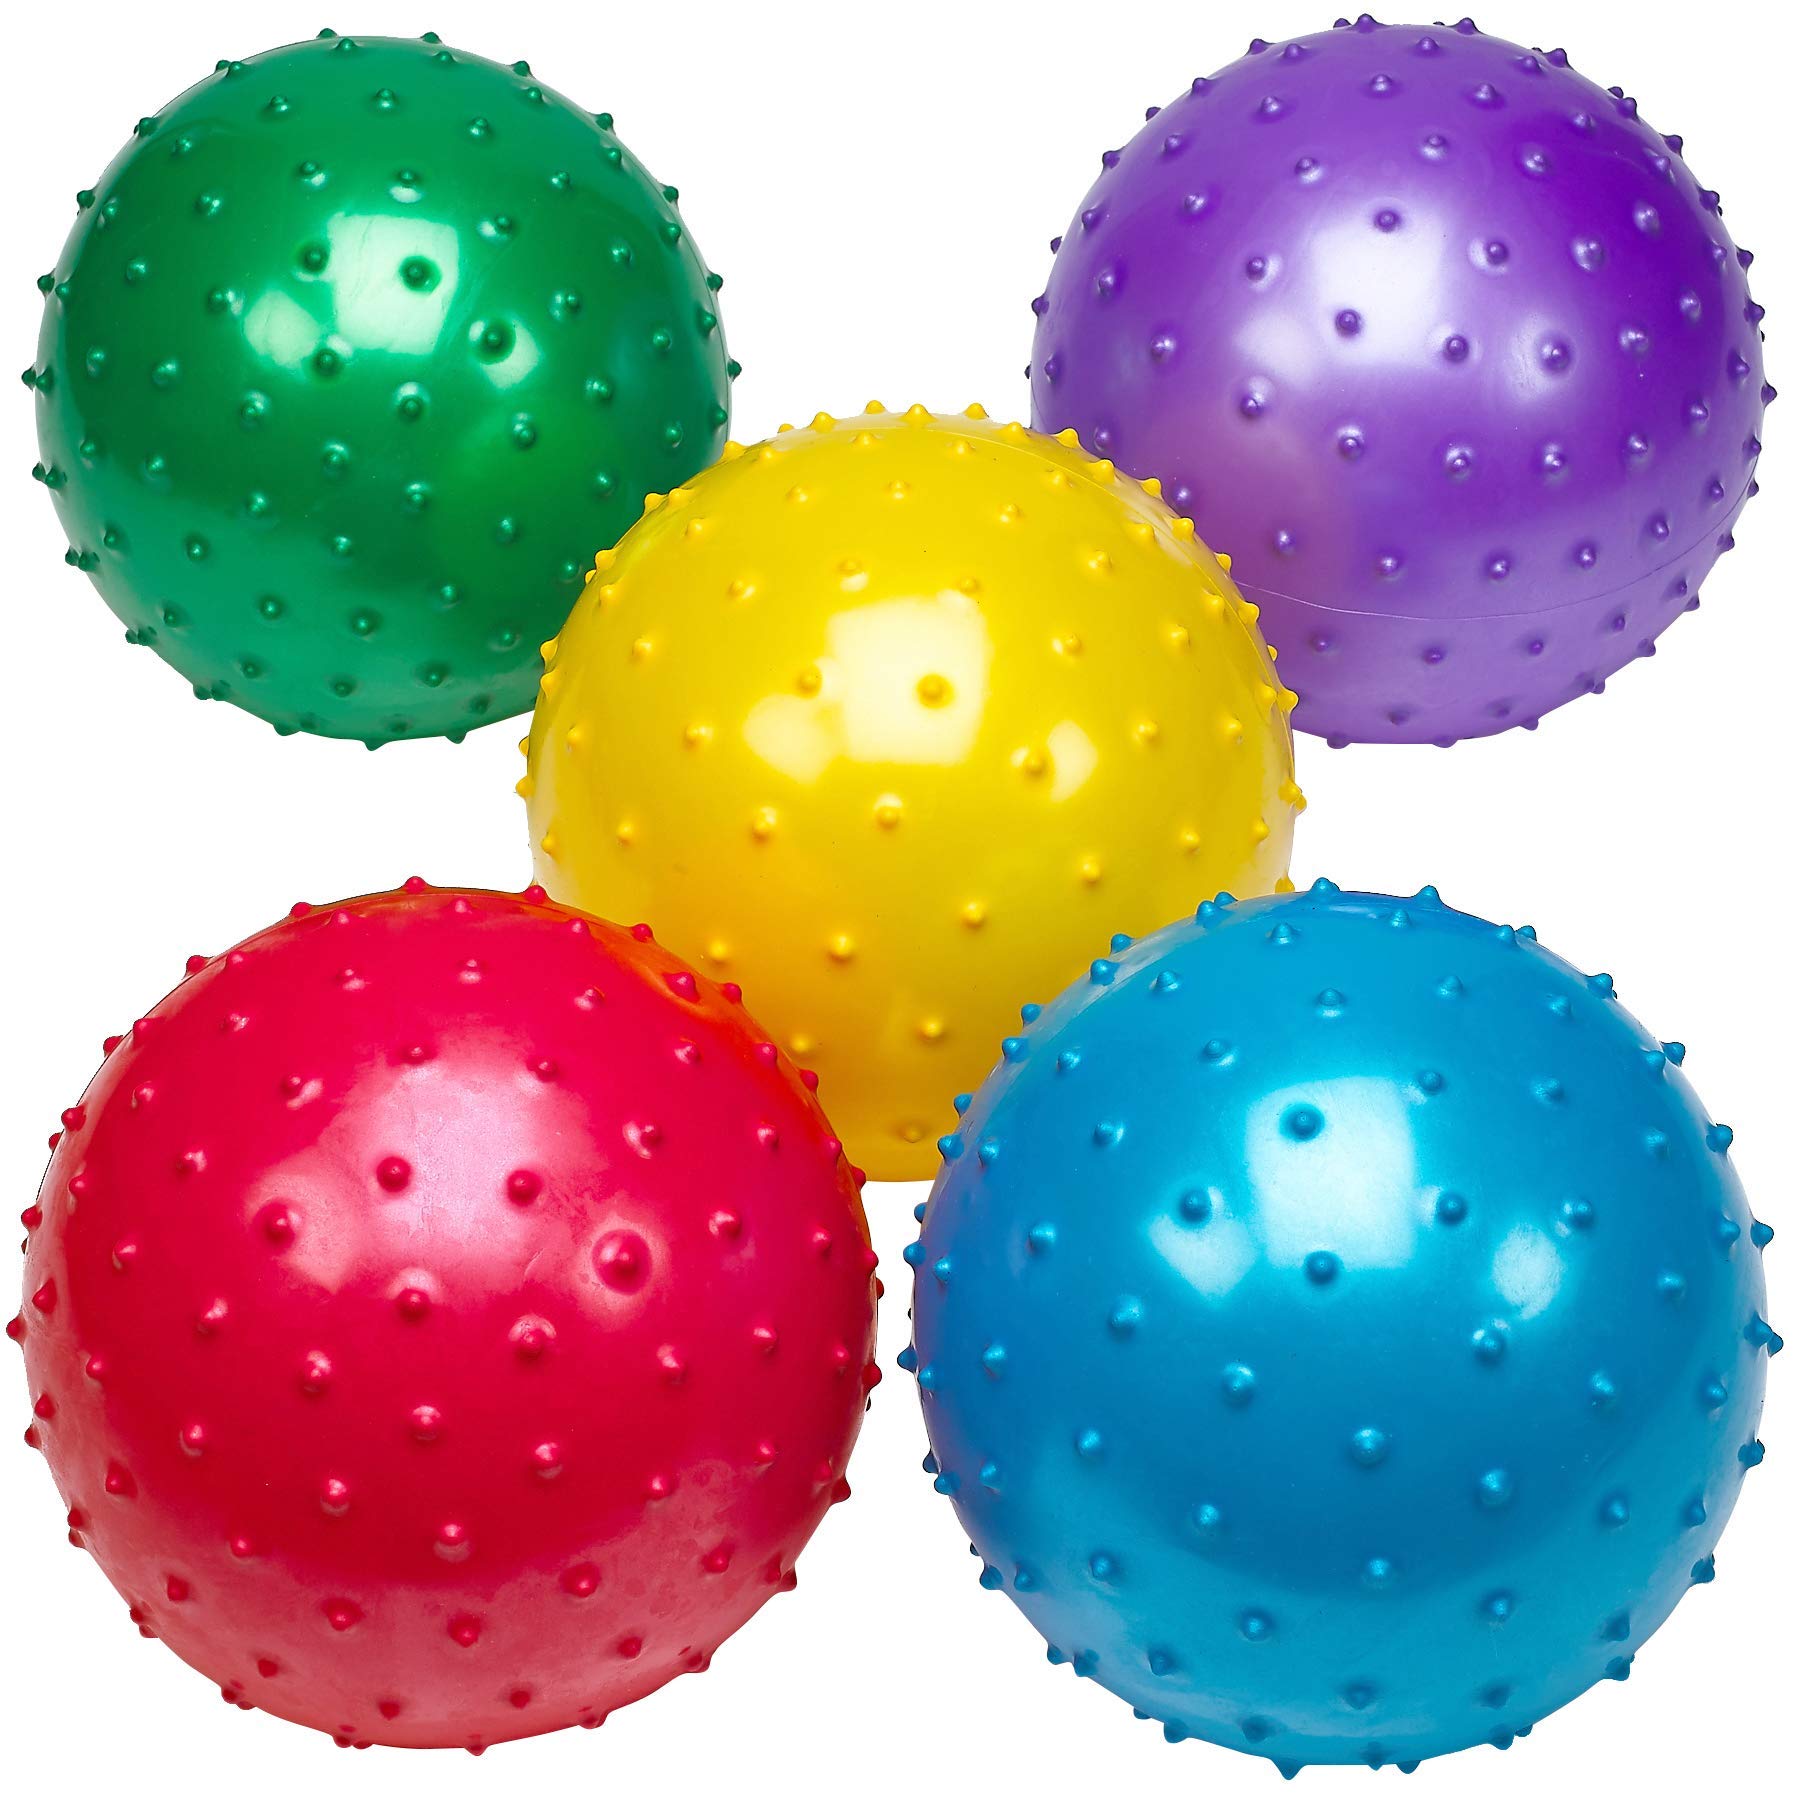 Bedwina Big Knobby Balls - (Pack of 5) 18 Inch Fun Bouncy Balls for Toddlers and Kids – Plus Added Hand Air Pump, Great for Tactile Sensory Balls, Spiky Stress Ball, Fidget Toys, and Party Favors